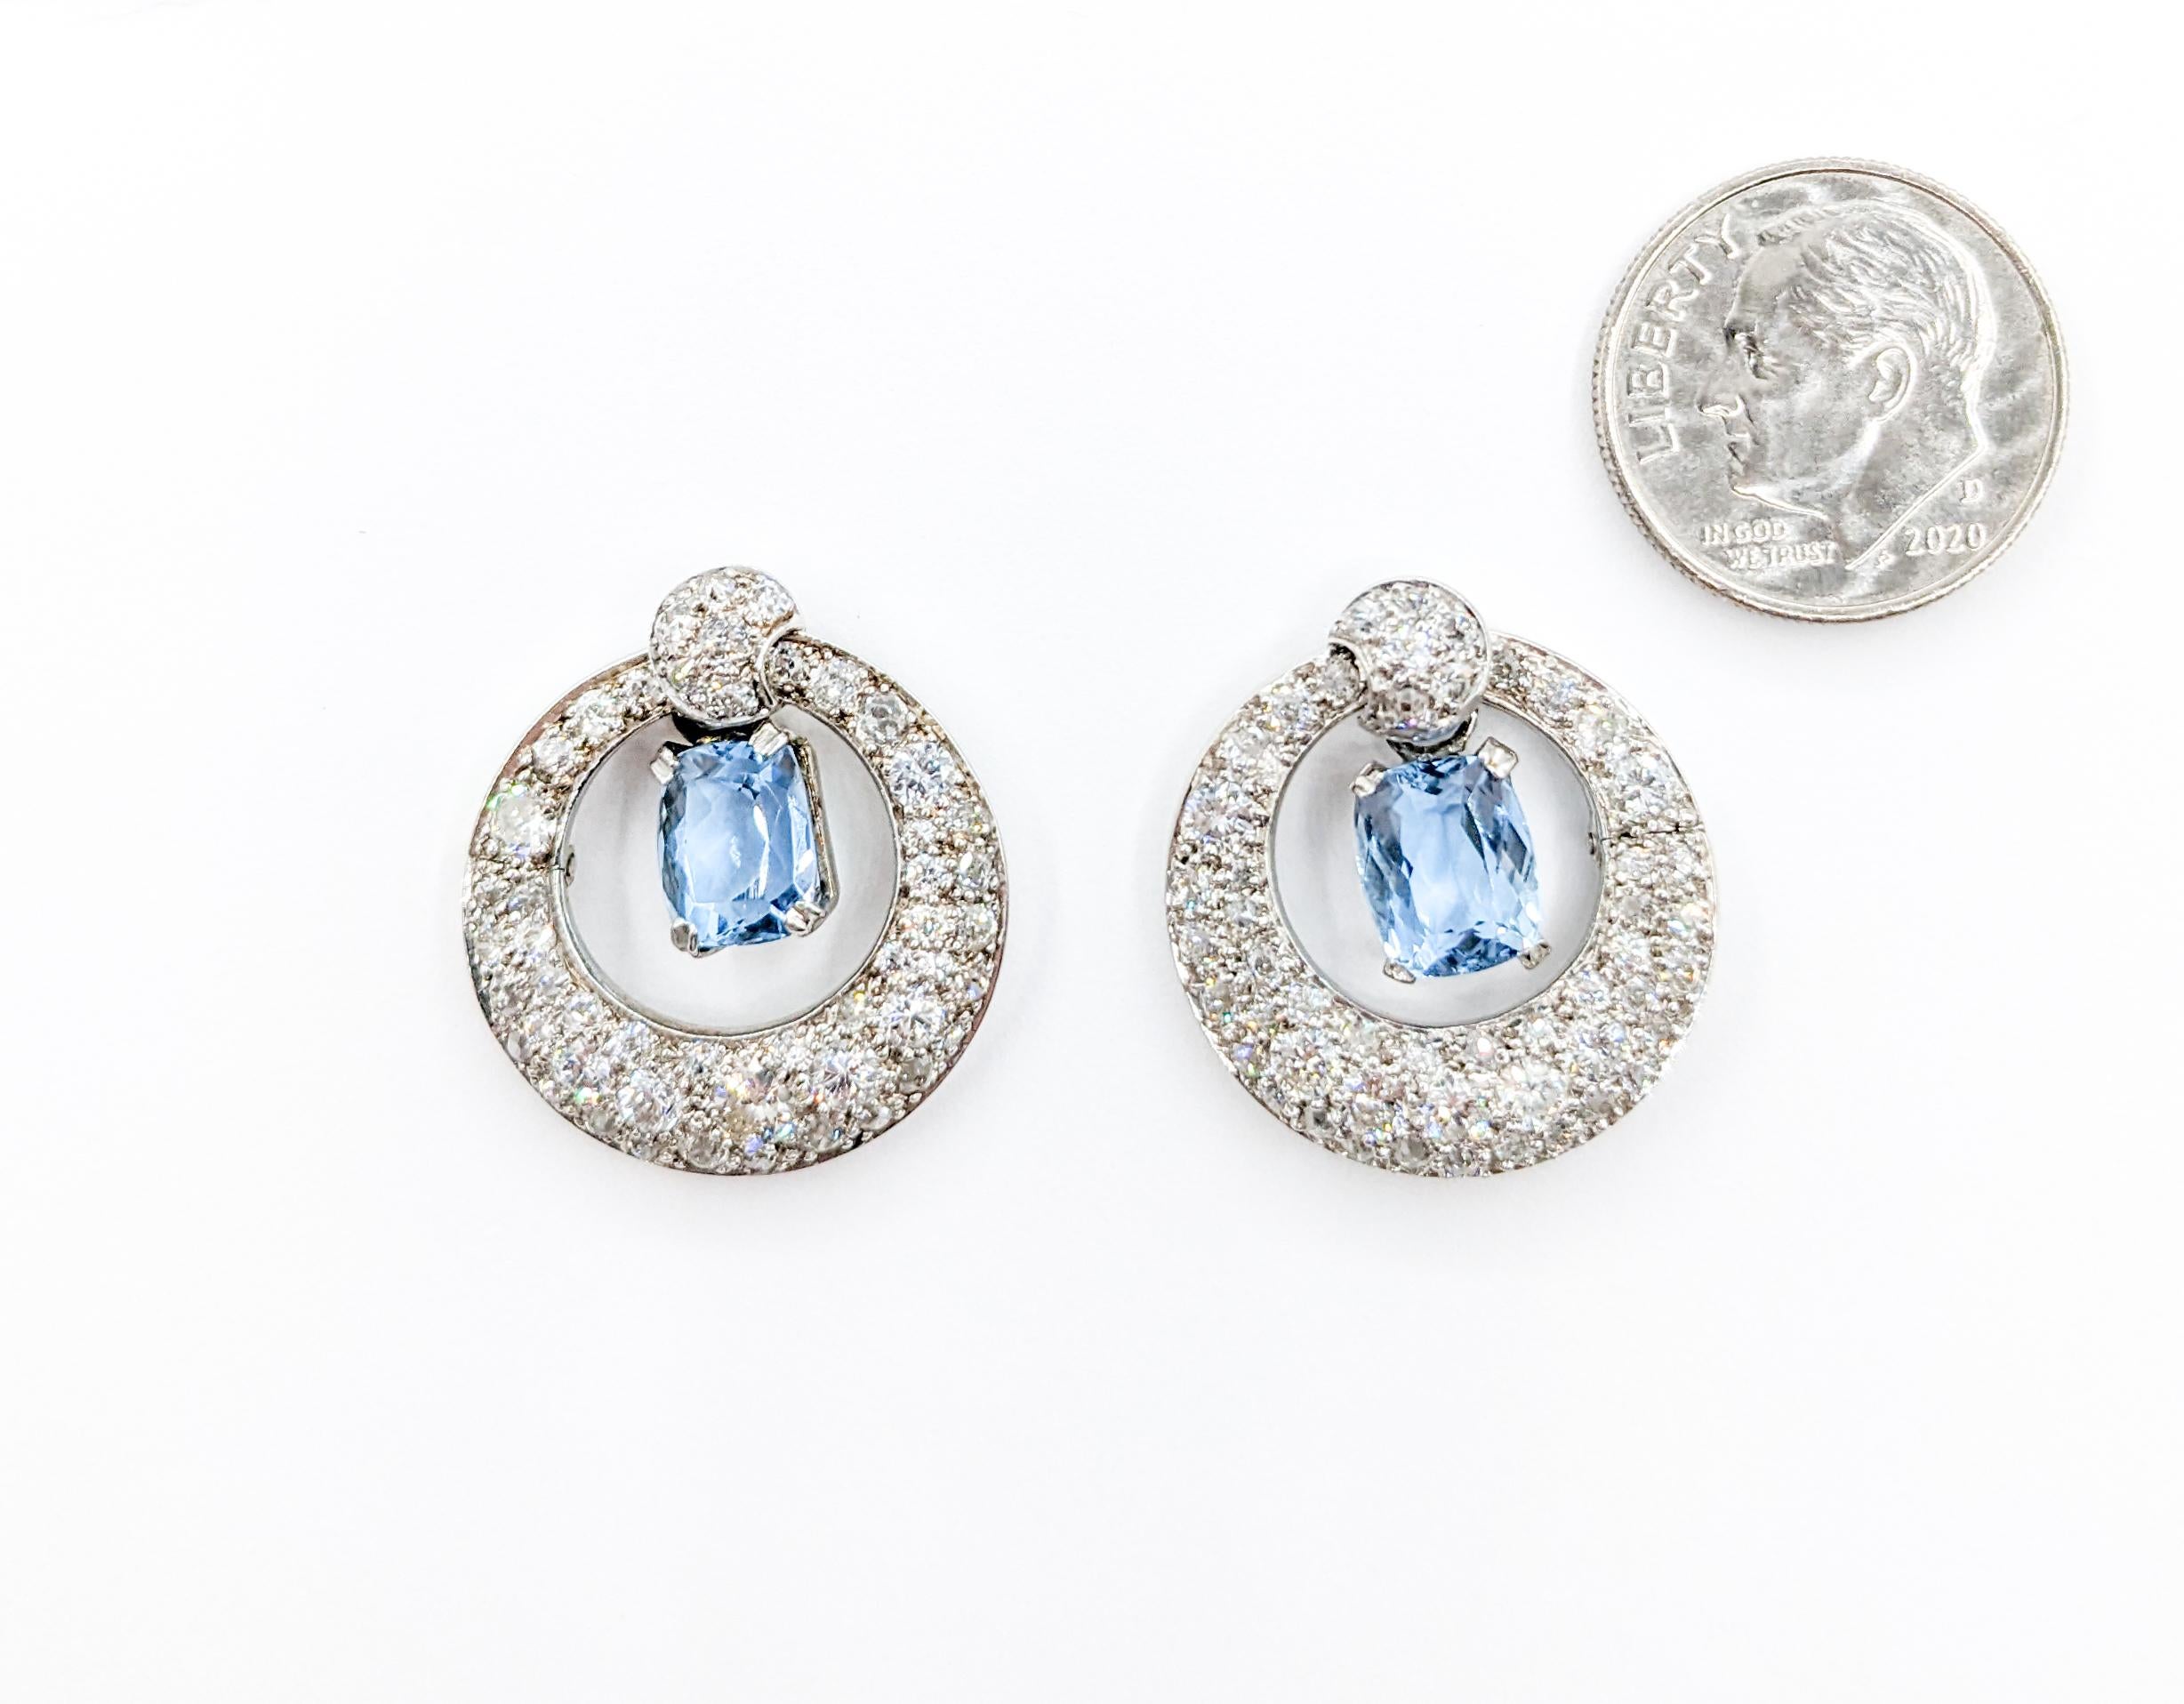 Glamorous Platinum Aquamarine & Pave Diamond Drop Earrings

Elevate your timeless style with these exquisite earrings diamond and aquamarine earrings. Meticulously designed in a fusion of luminous platinum and 14k white gold, they showcase luminous